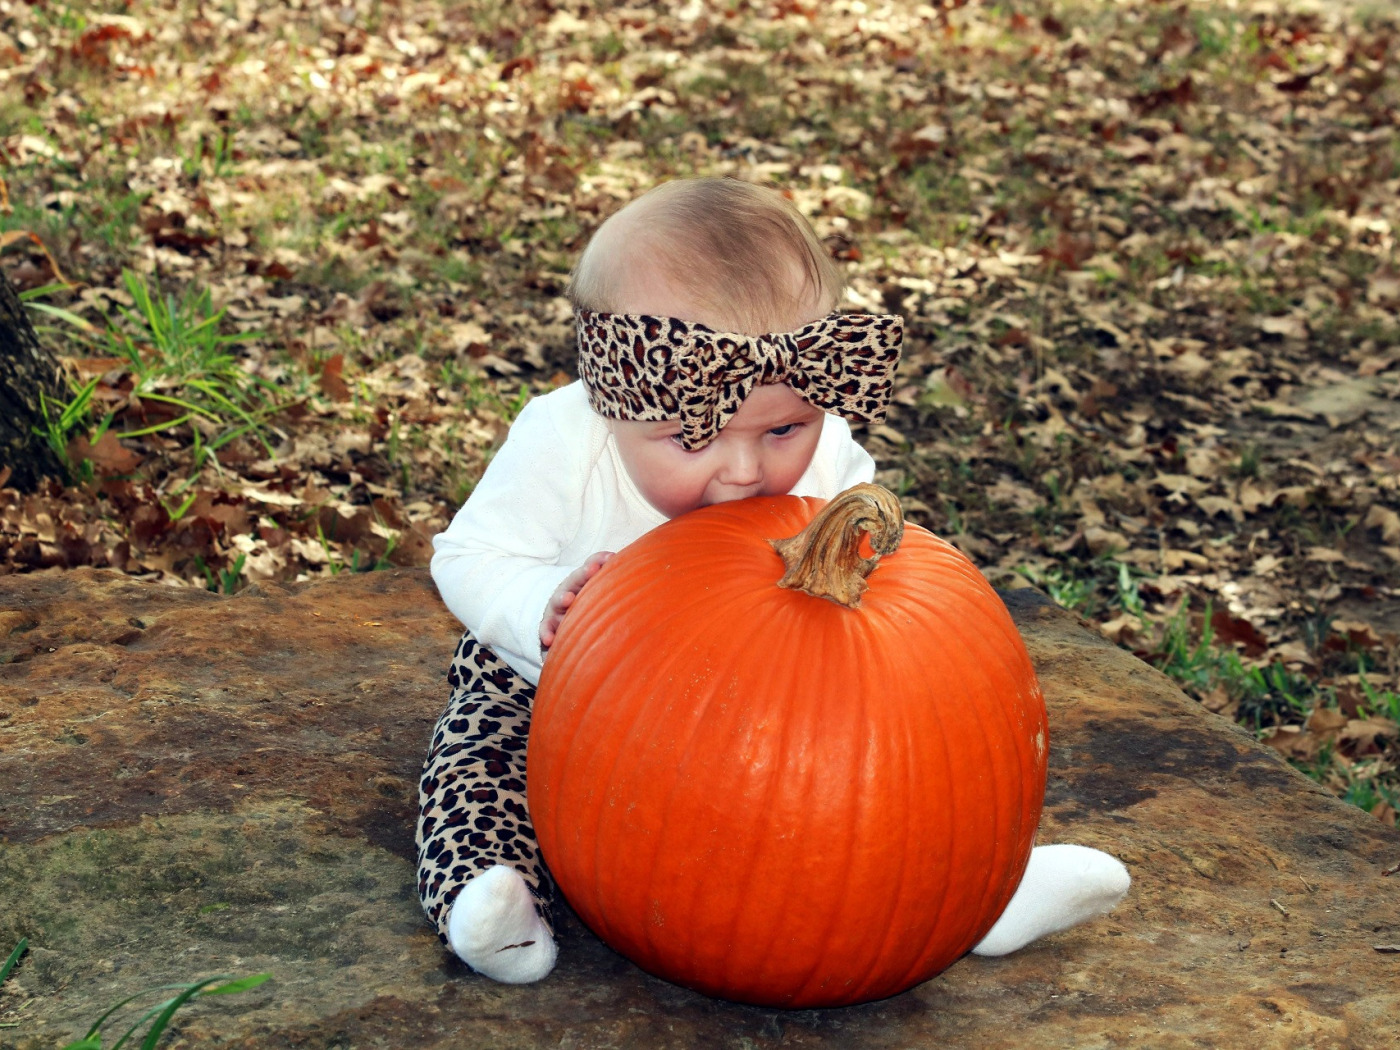 Download wallpaper girl, pumpkin, bow, section mood in resolution 1400x1050...